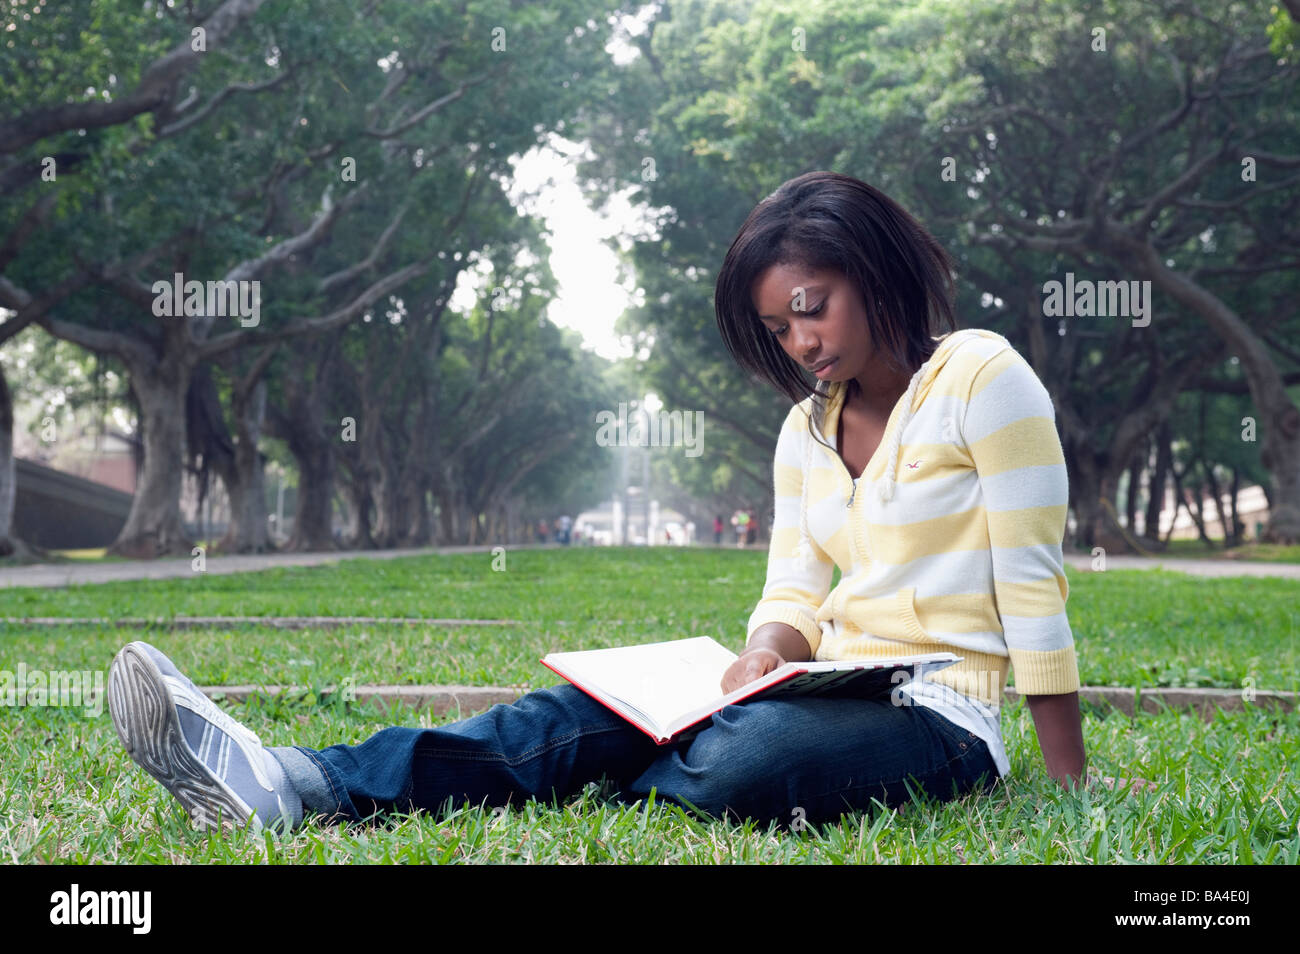 Young Woman Sitting In Park Reading A Text Book Stock Photo